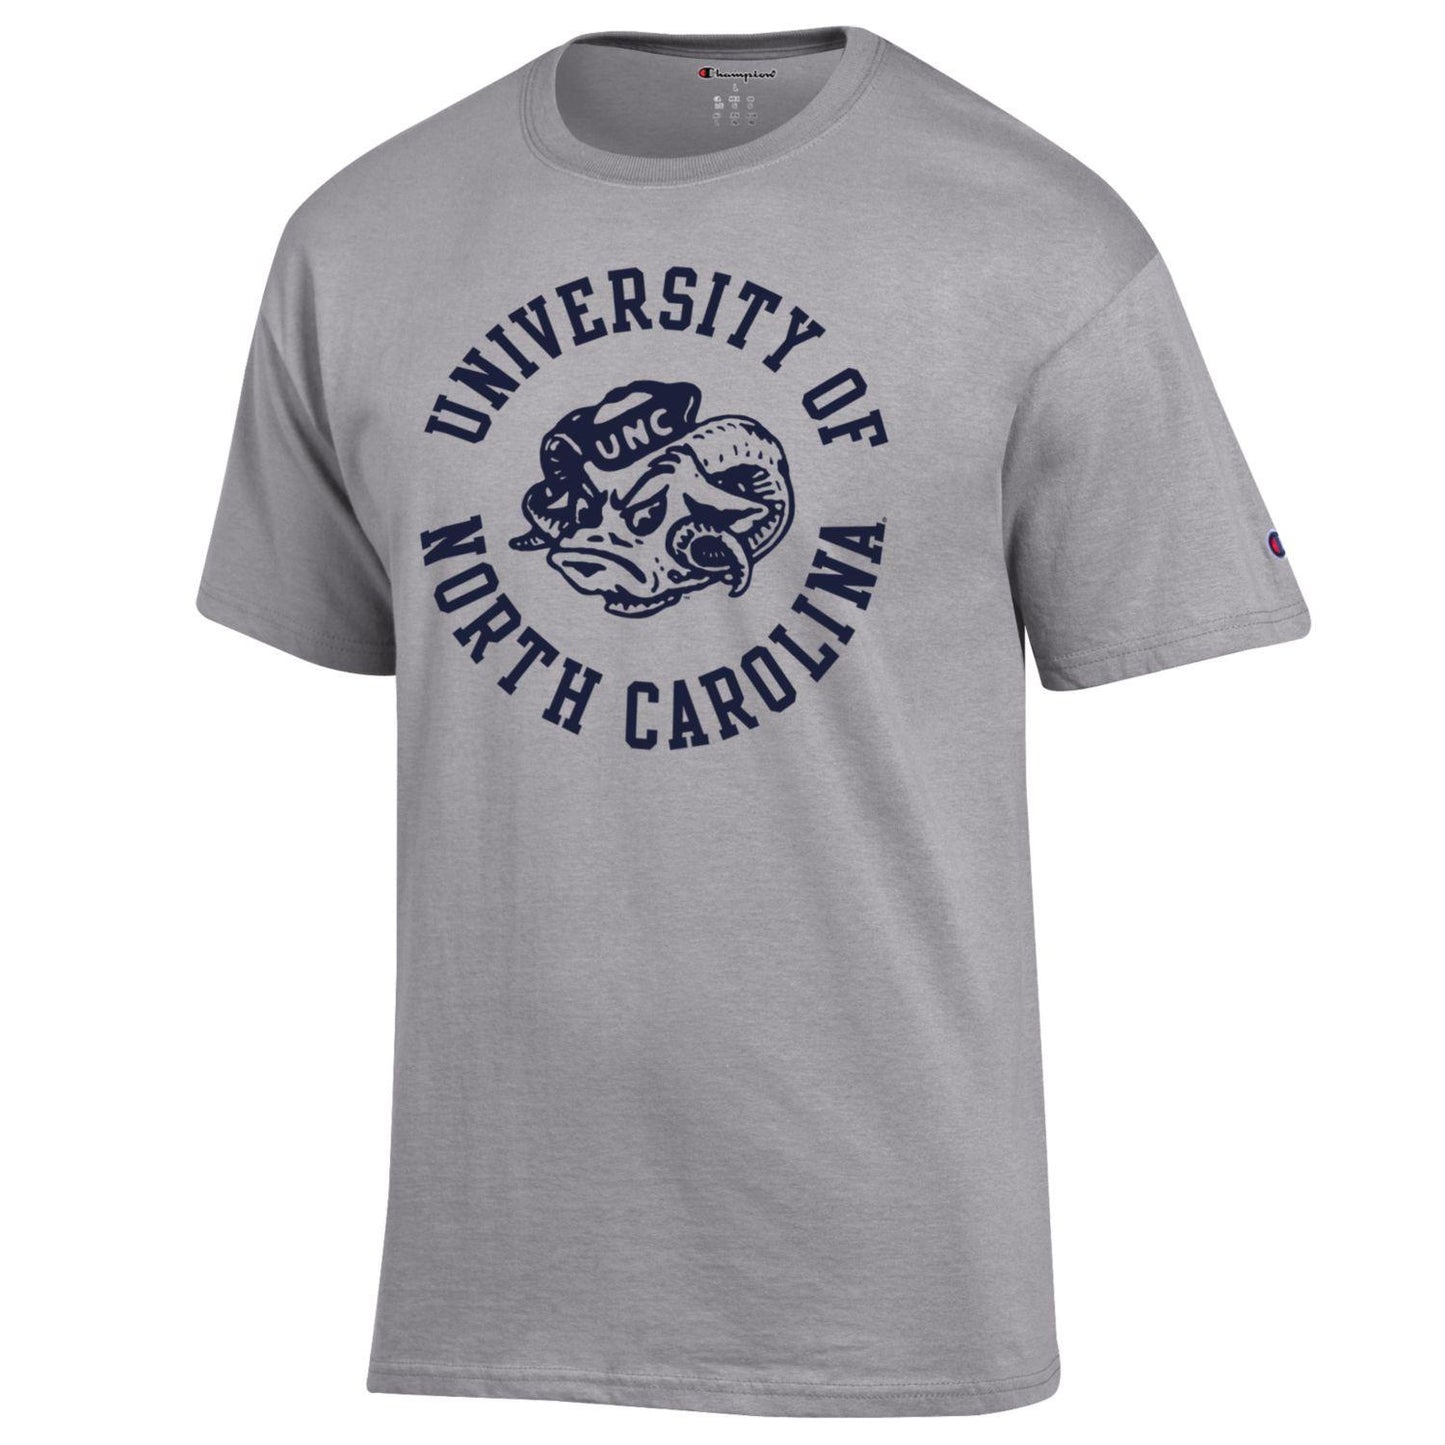 Vintage UNC Ram with Circle Design in Grey T-Shirt